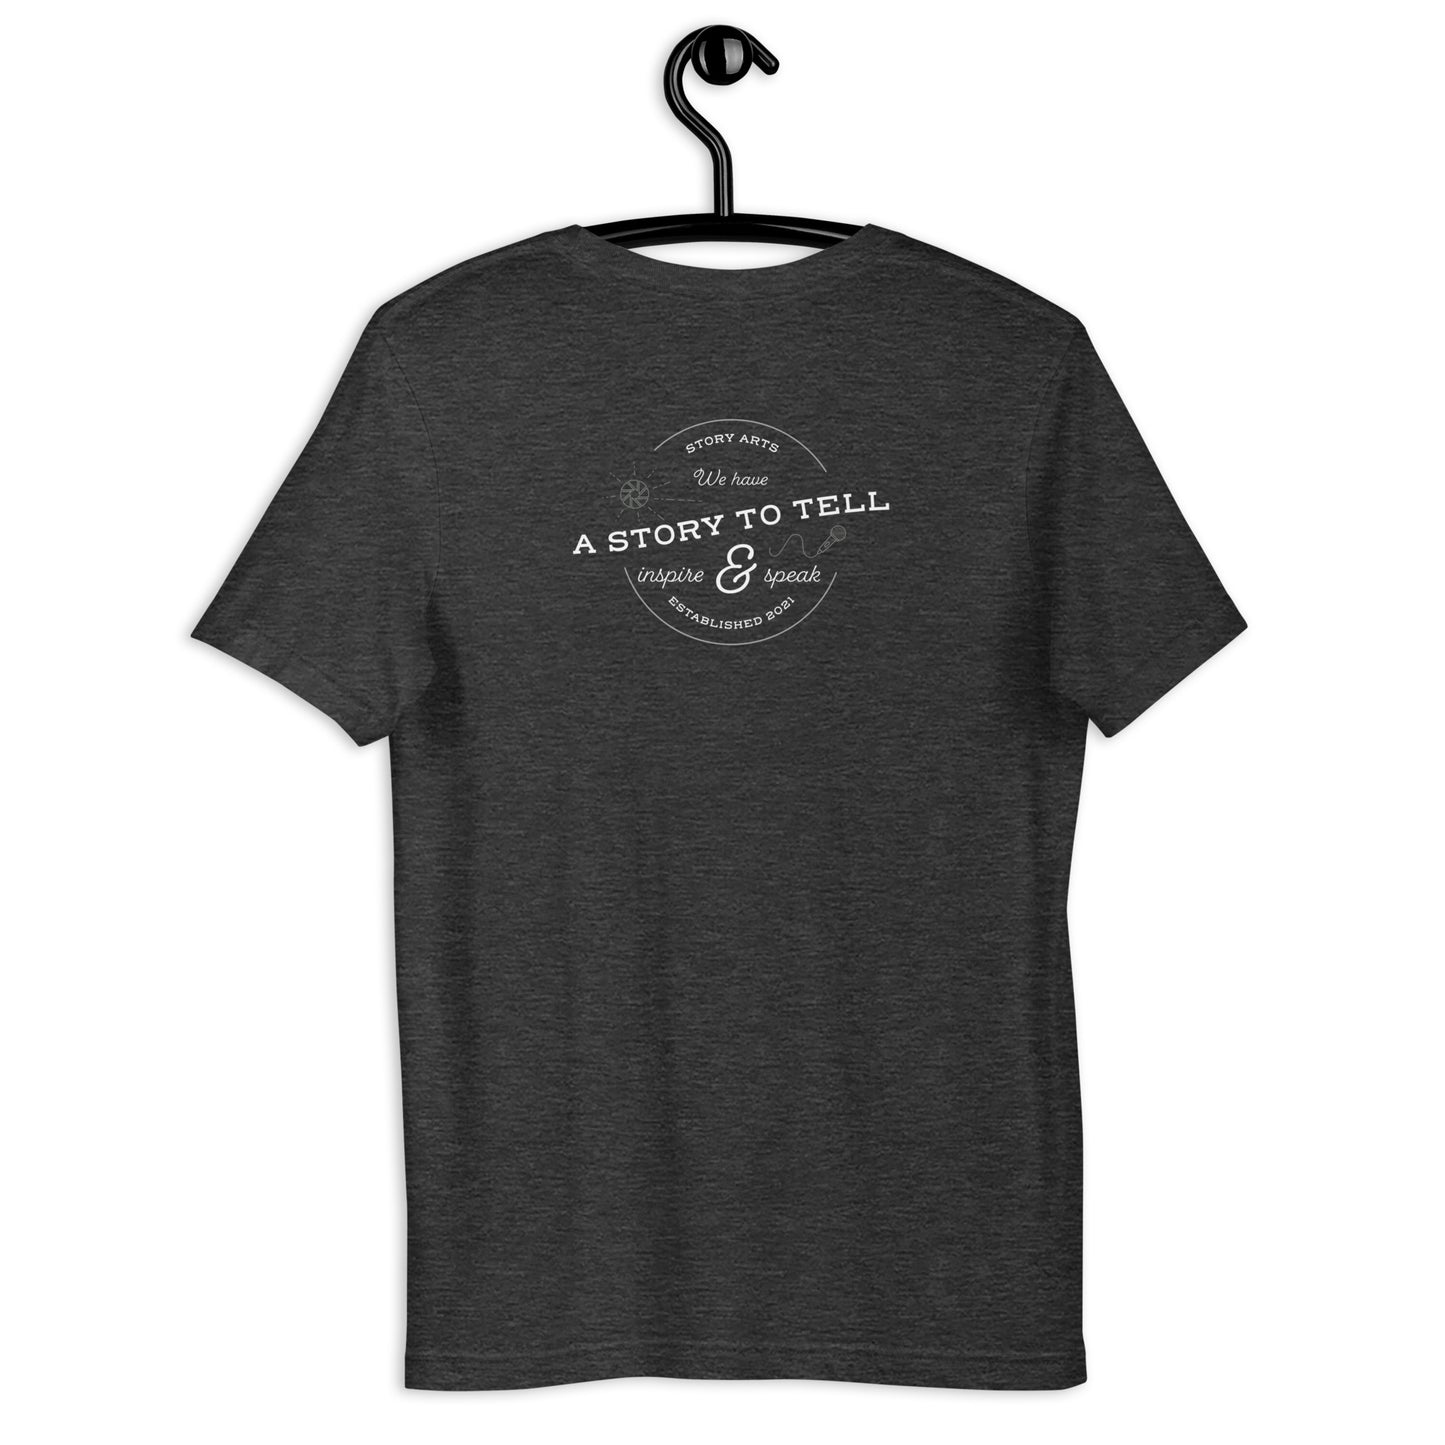 I Have a Story To Tell T-Shirt